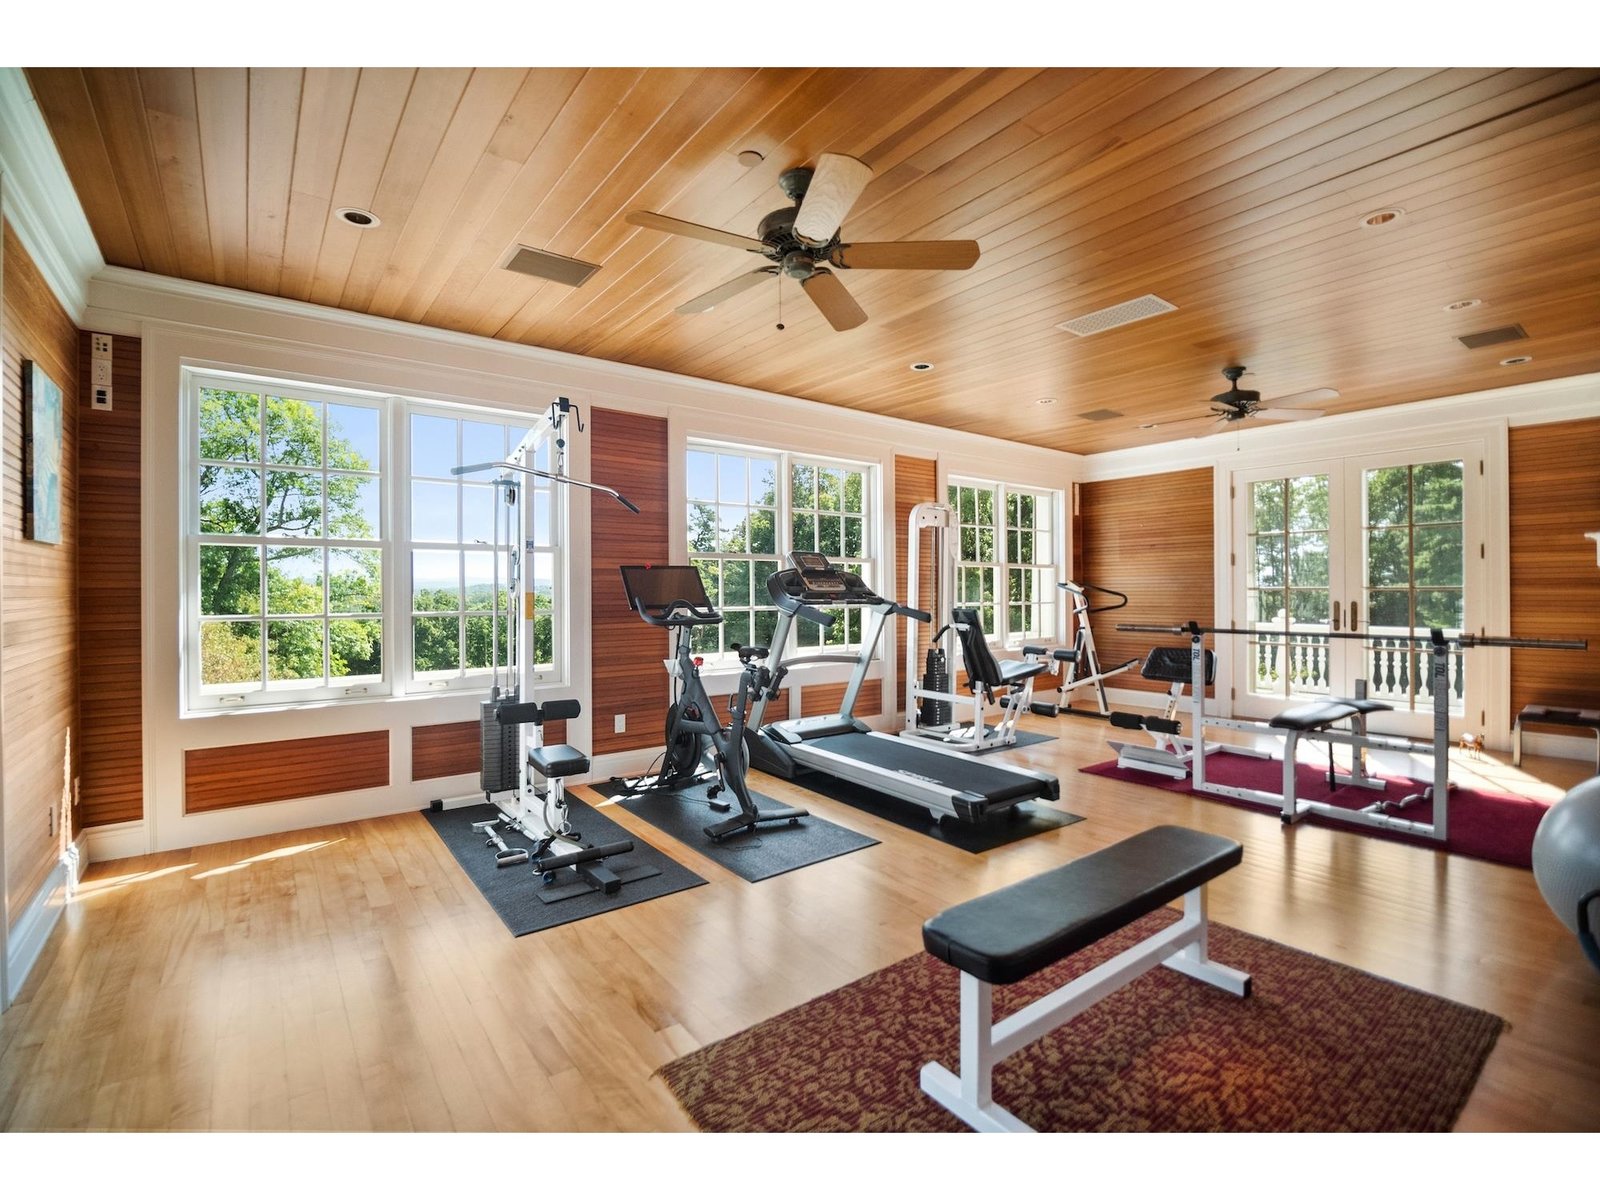 Priamry suite gym room with mountain views